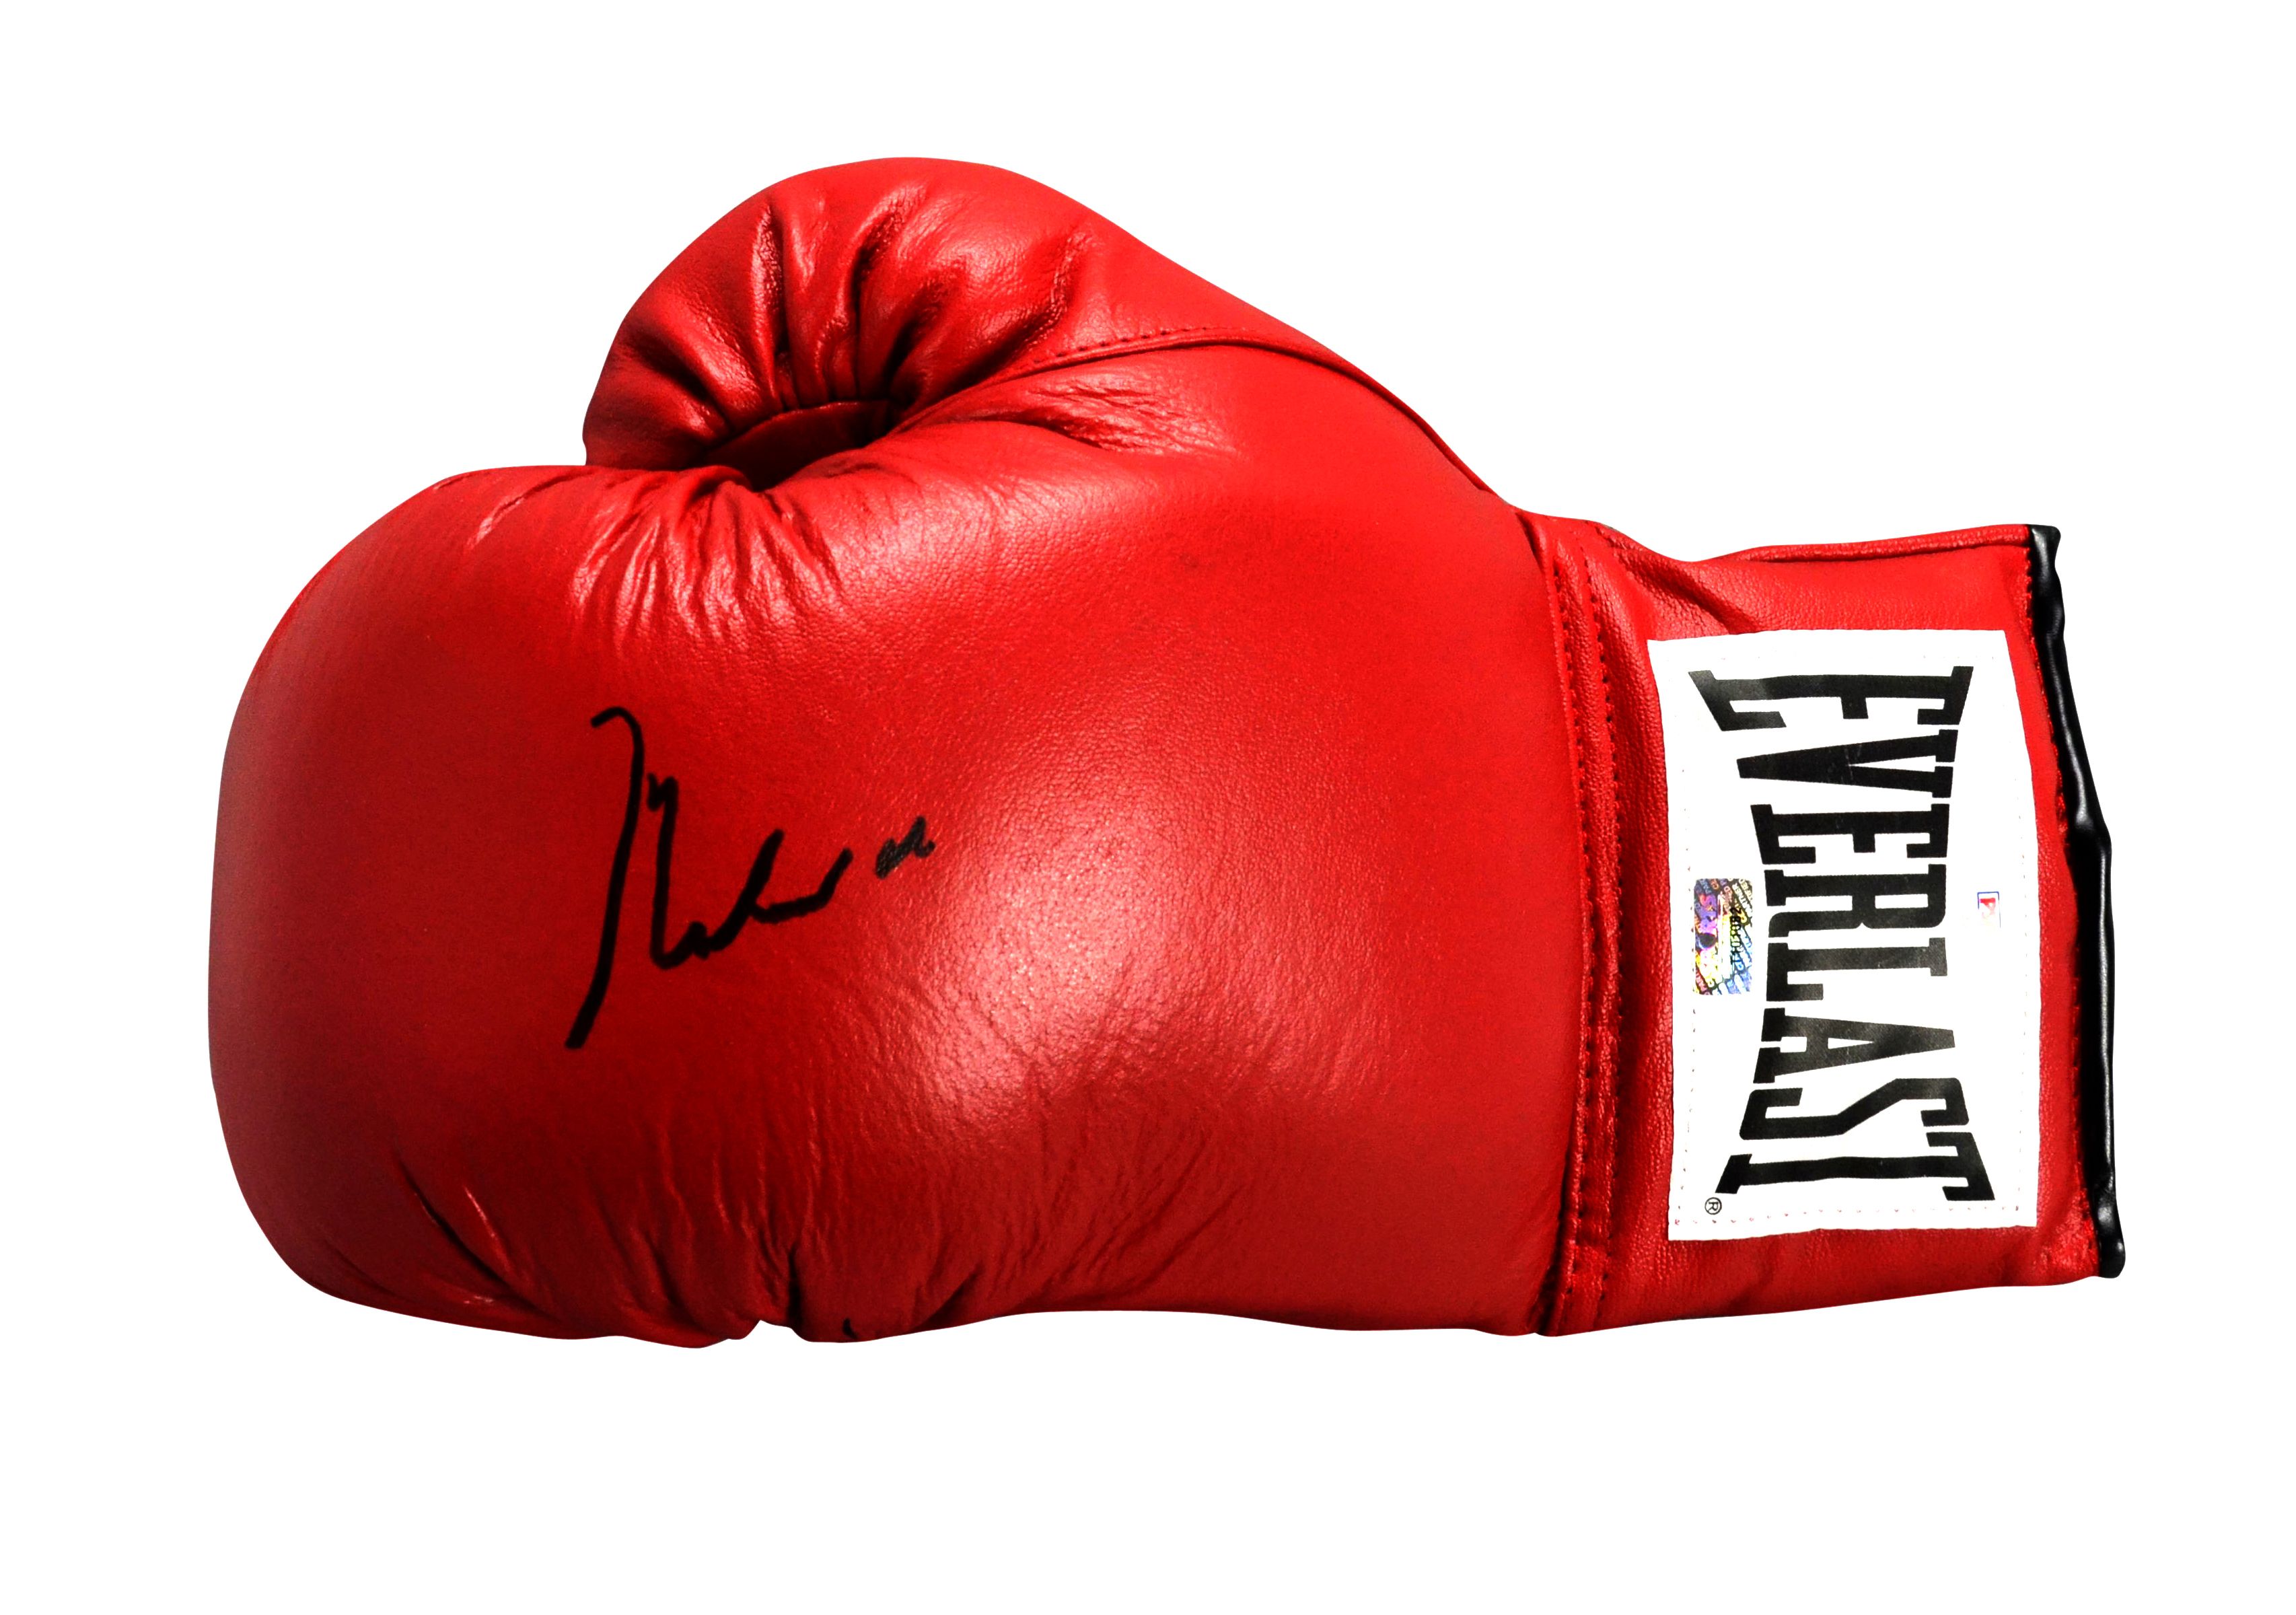 14 Boxing Glove Images Free Cliparts That You Can Download To You    